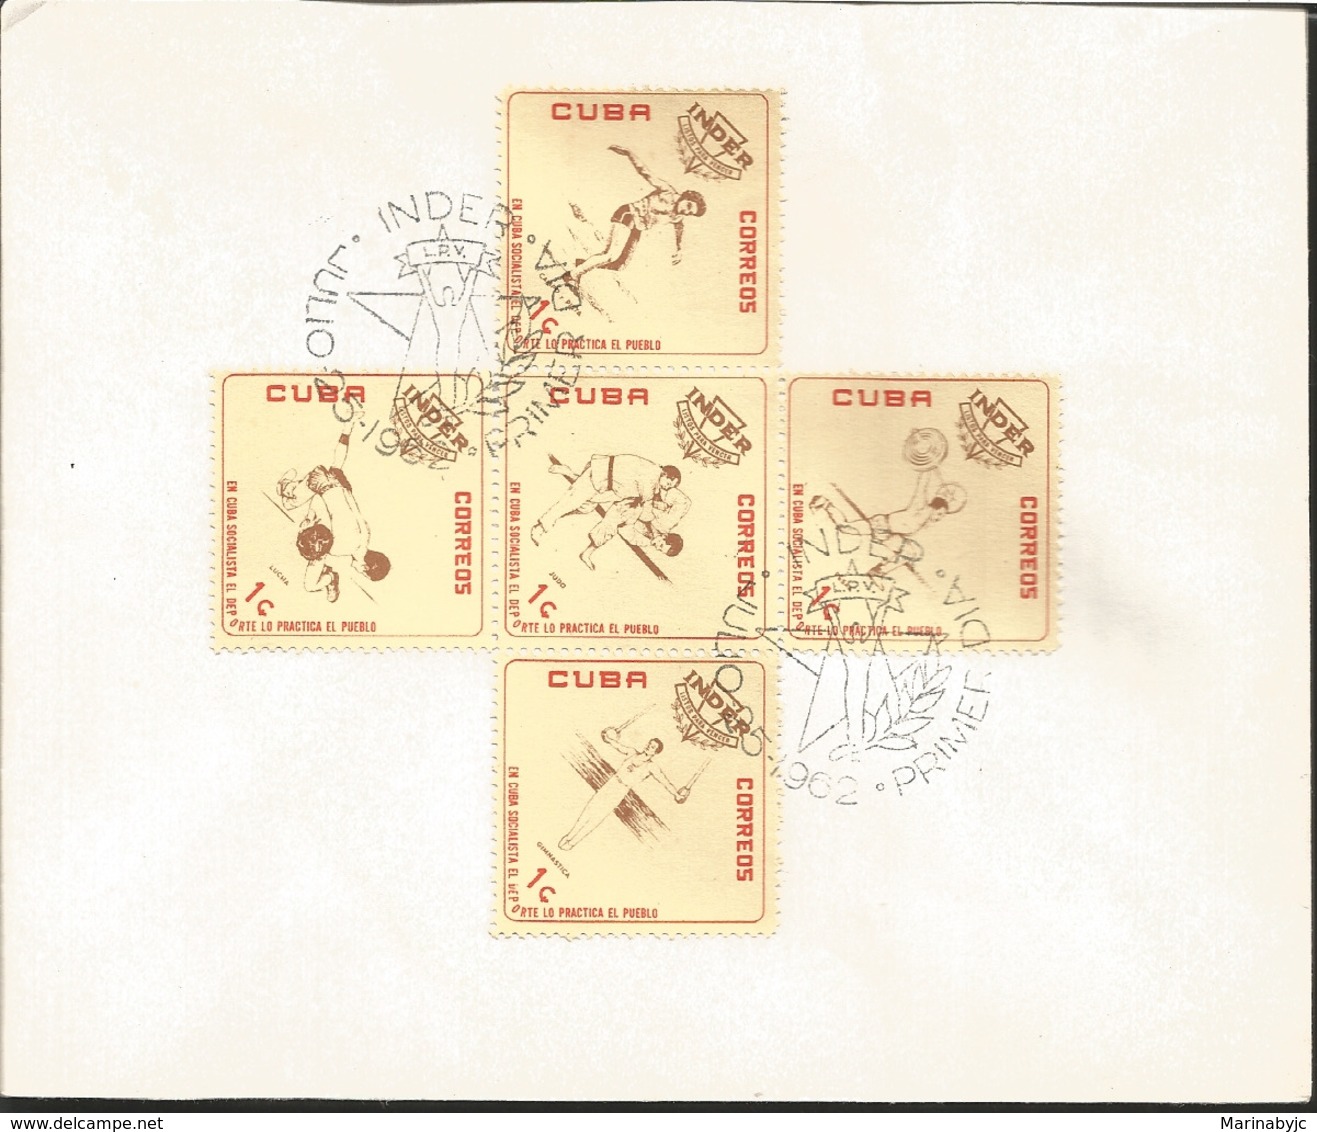 V) 1962 CARIBBEAN, SPORTS INSTITUTE, INDER, EMBLEM AND ATHLETES, BLACK CANCELLATION, WITH SLOGAN CANCELLATION, FDC - Lettres & Documents